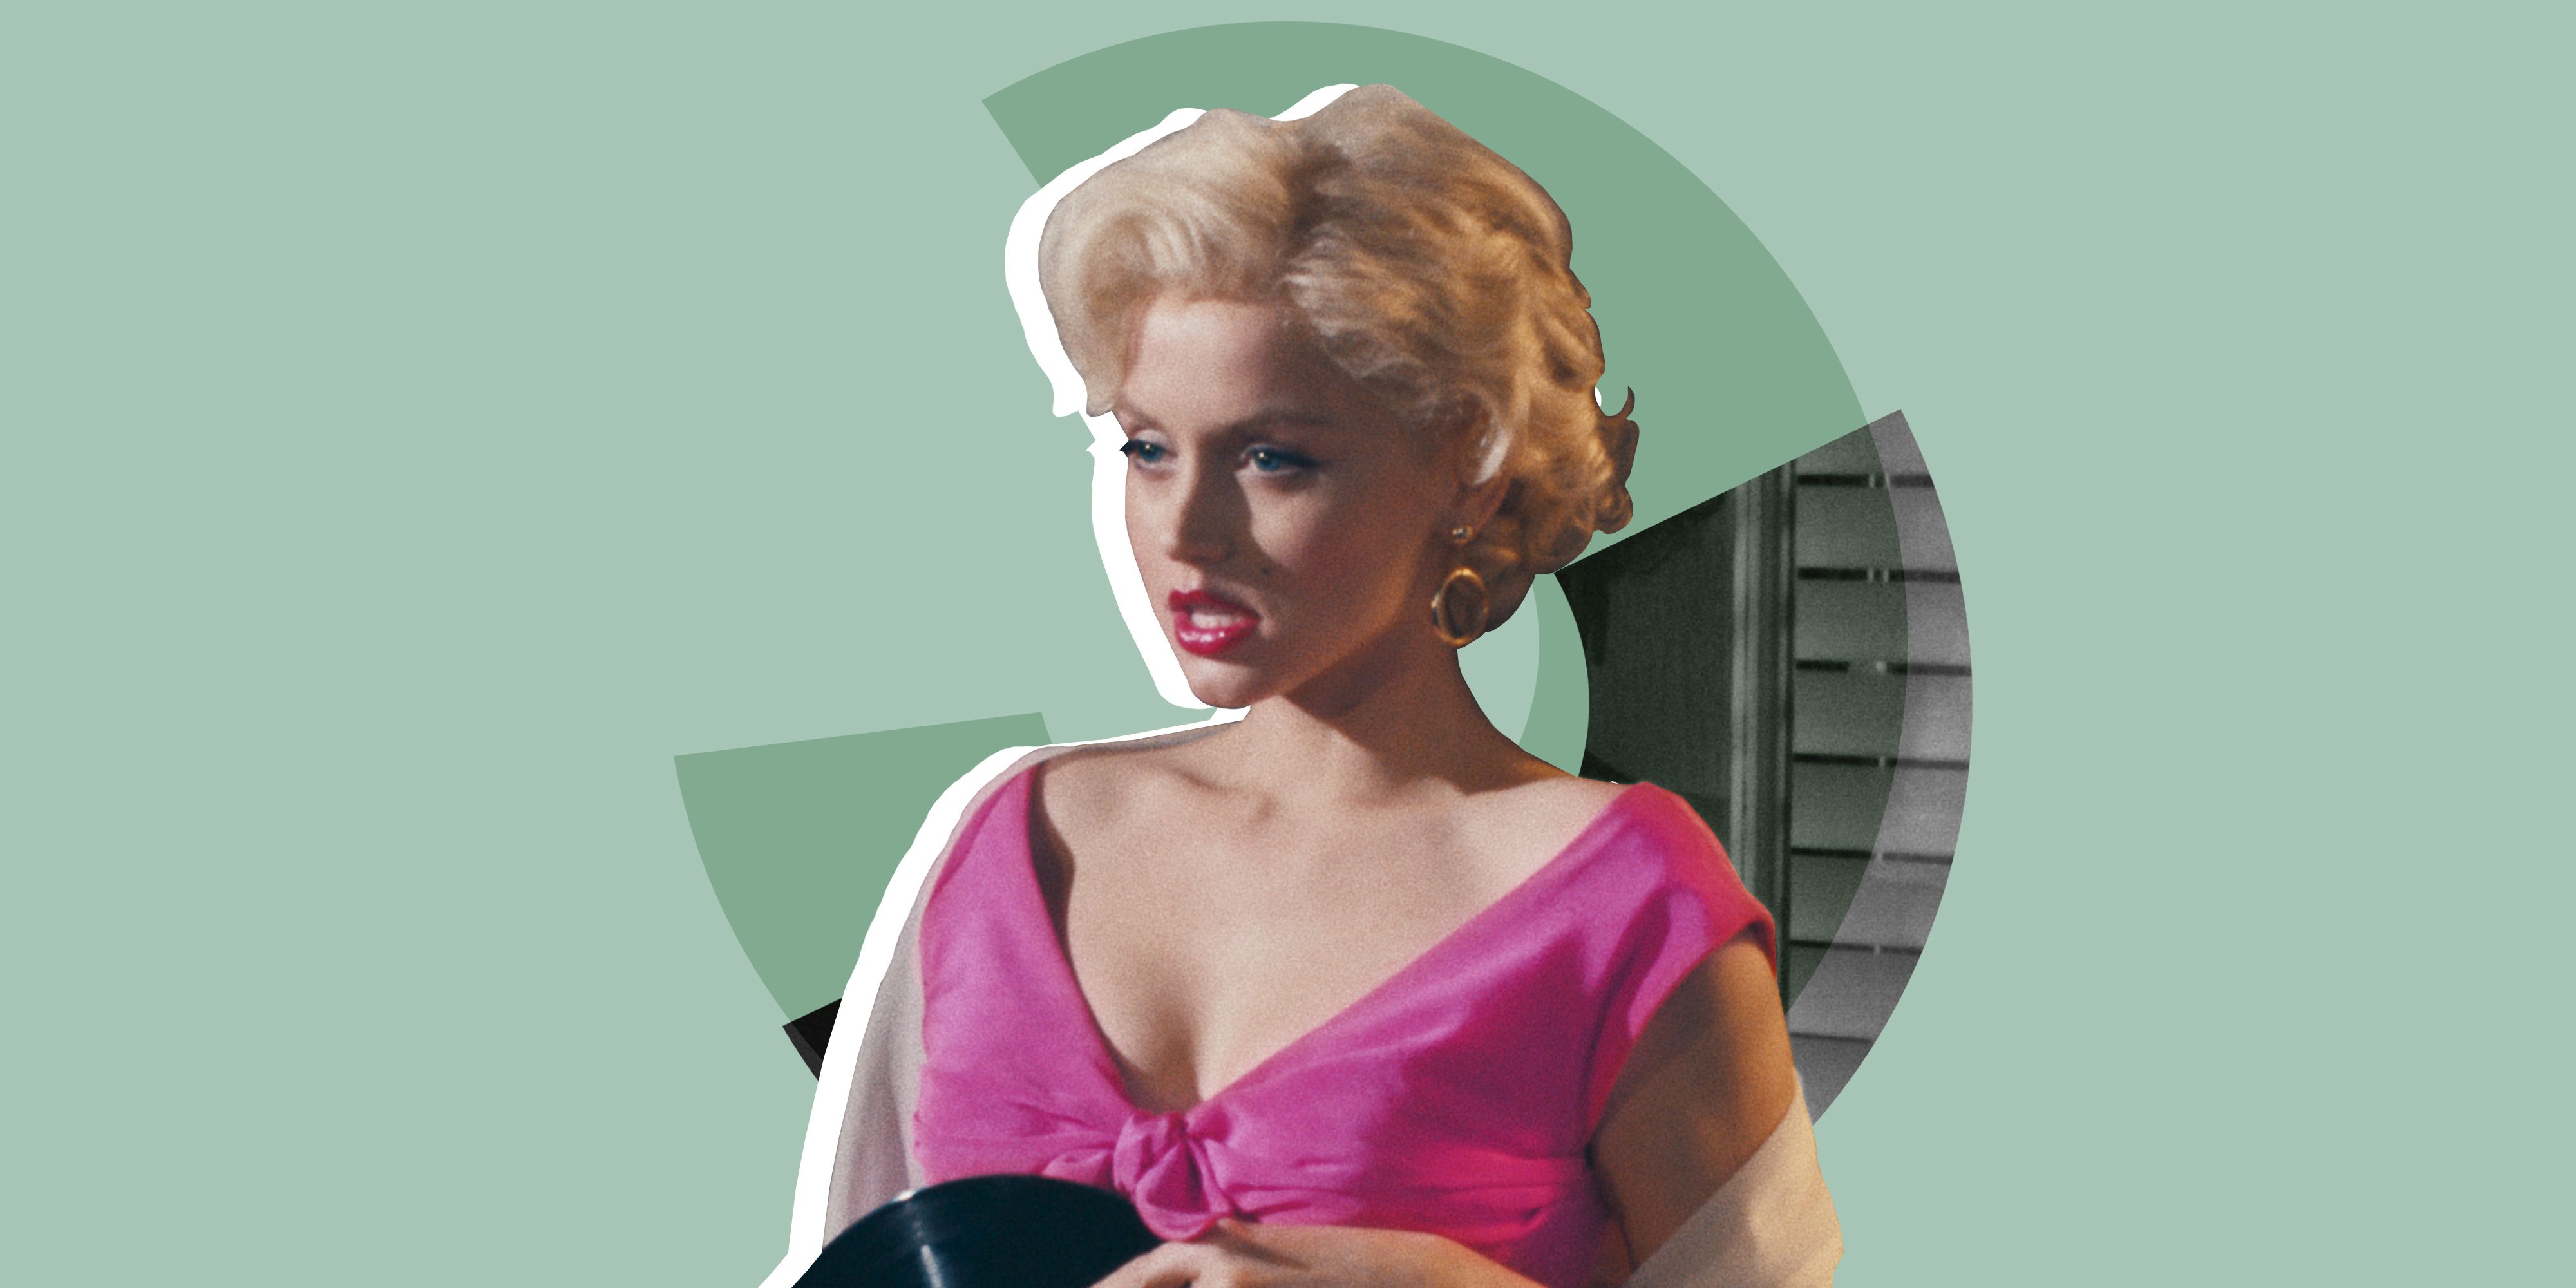 Biggest Myths Vs. Facts in Marilyn Monroe 'Blonde' Movie